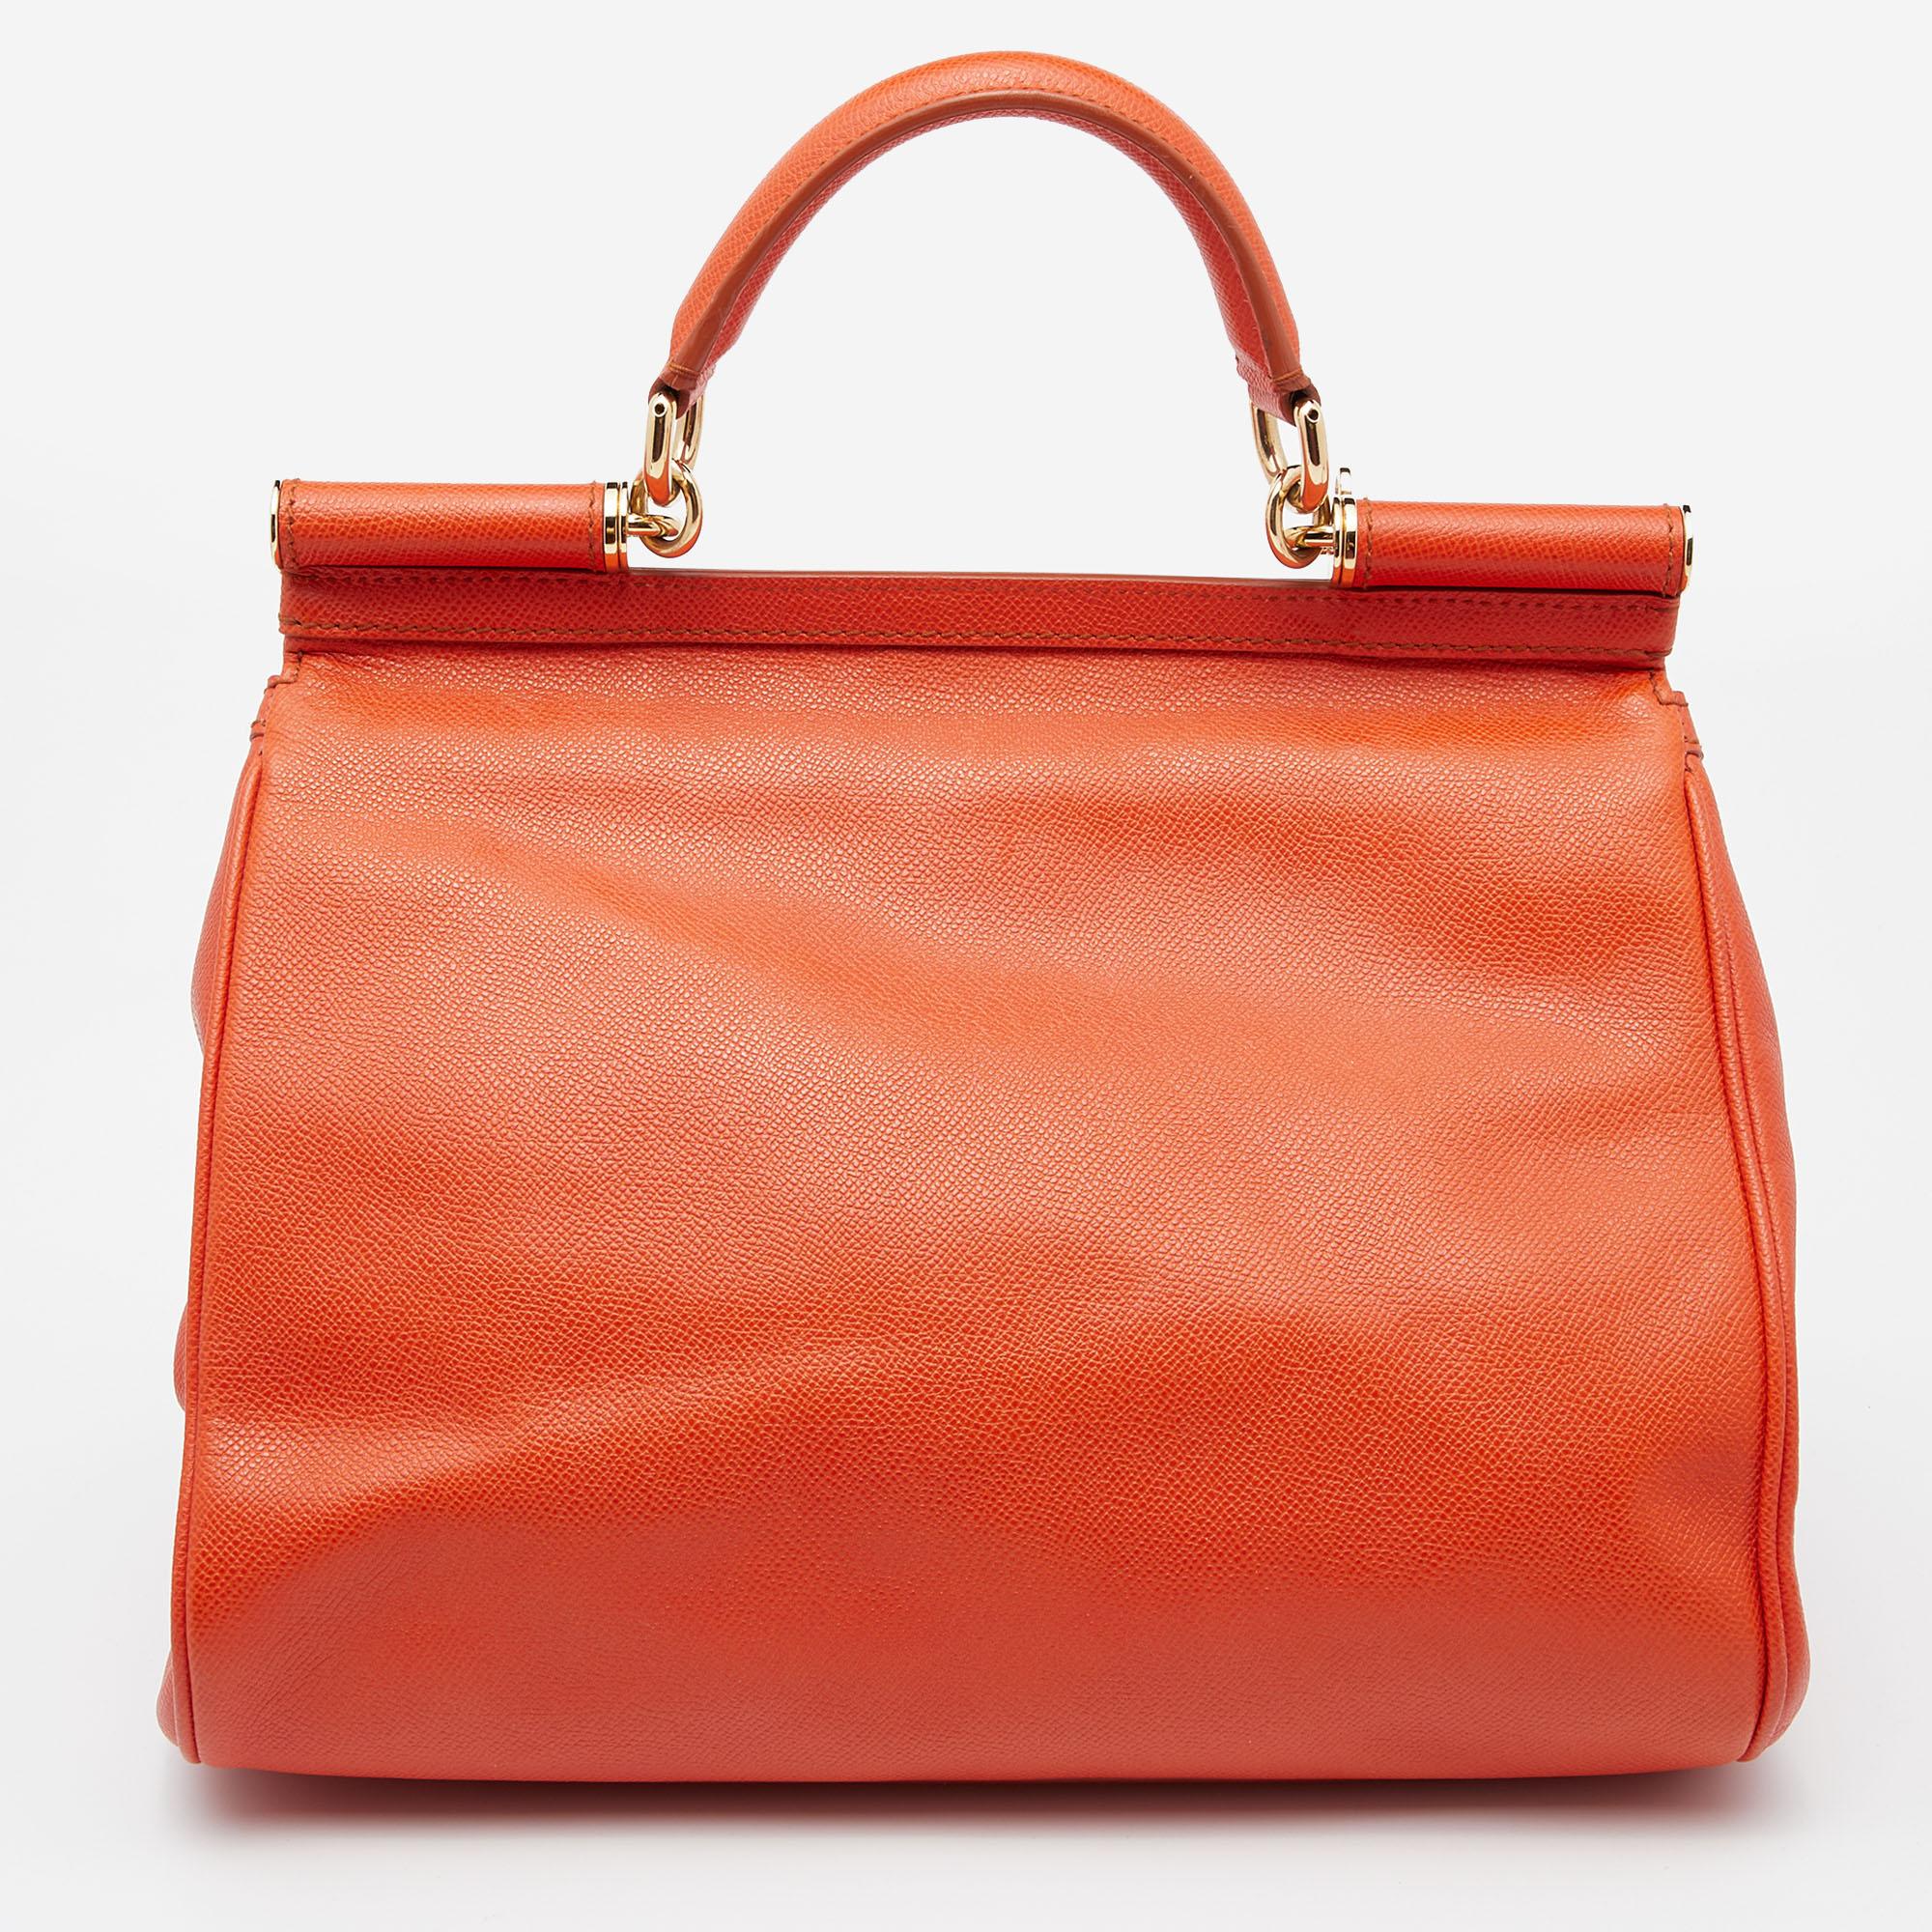 The iconic Miss Sicily bag by Dolce & Gabbana is one of the most loved designs from the brand. The charming silhouette of this version is made from sprightly orange leather and features a front flap carrying the logo plaque. The luxurious creation